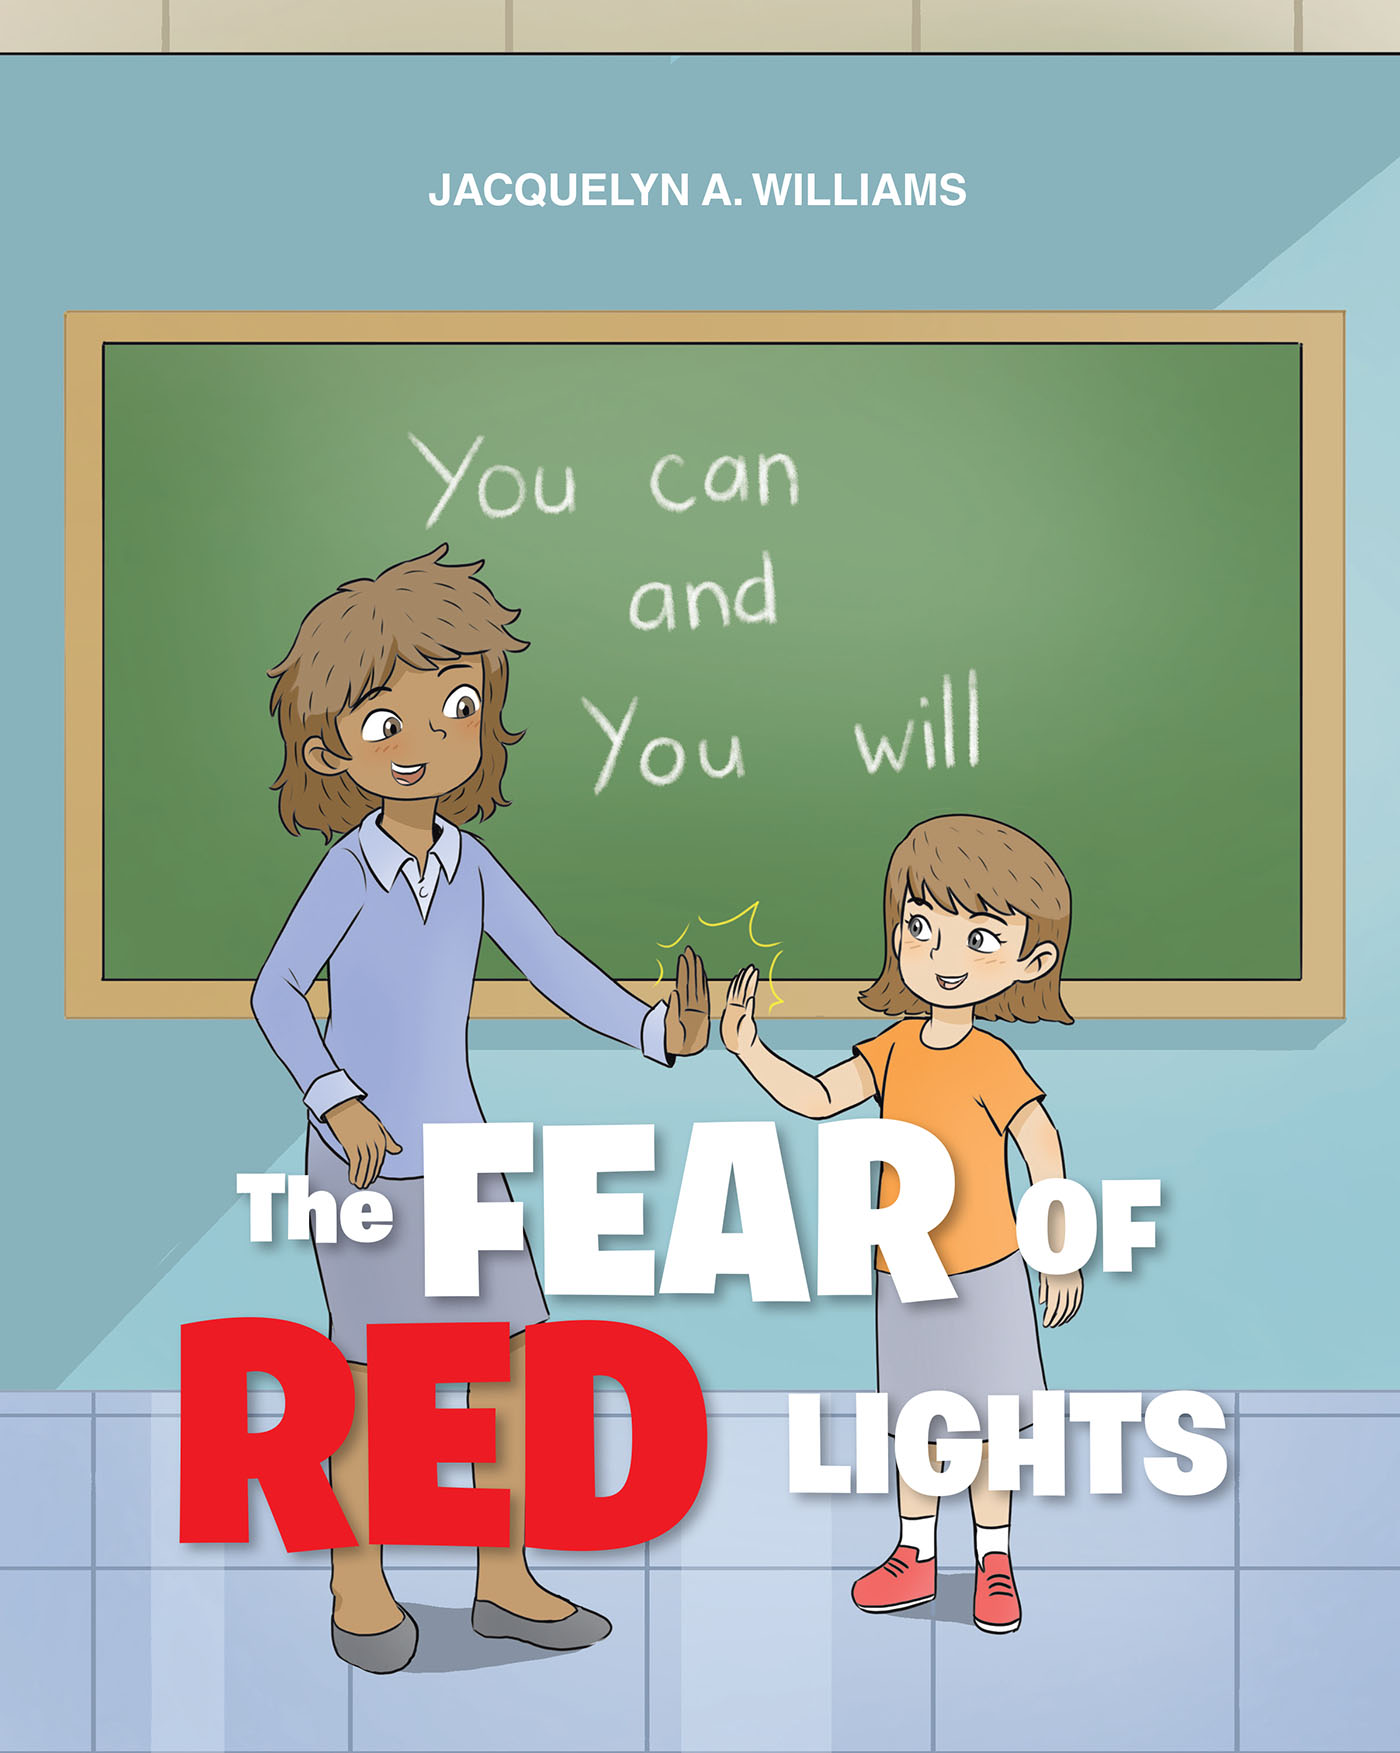 Jacquelyn A. Williams’s Newly Released "The Fear of the Red Lights" is an Encouraging Message for Young Readers Facing Negativity